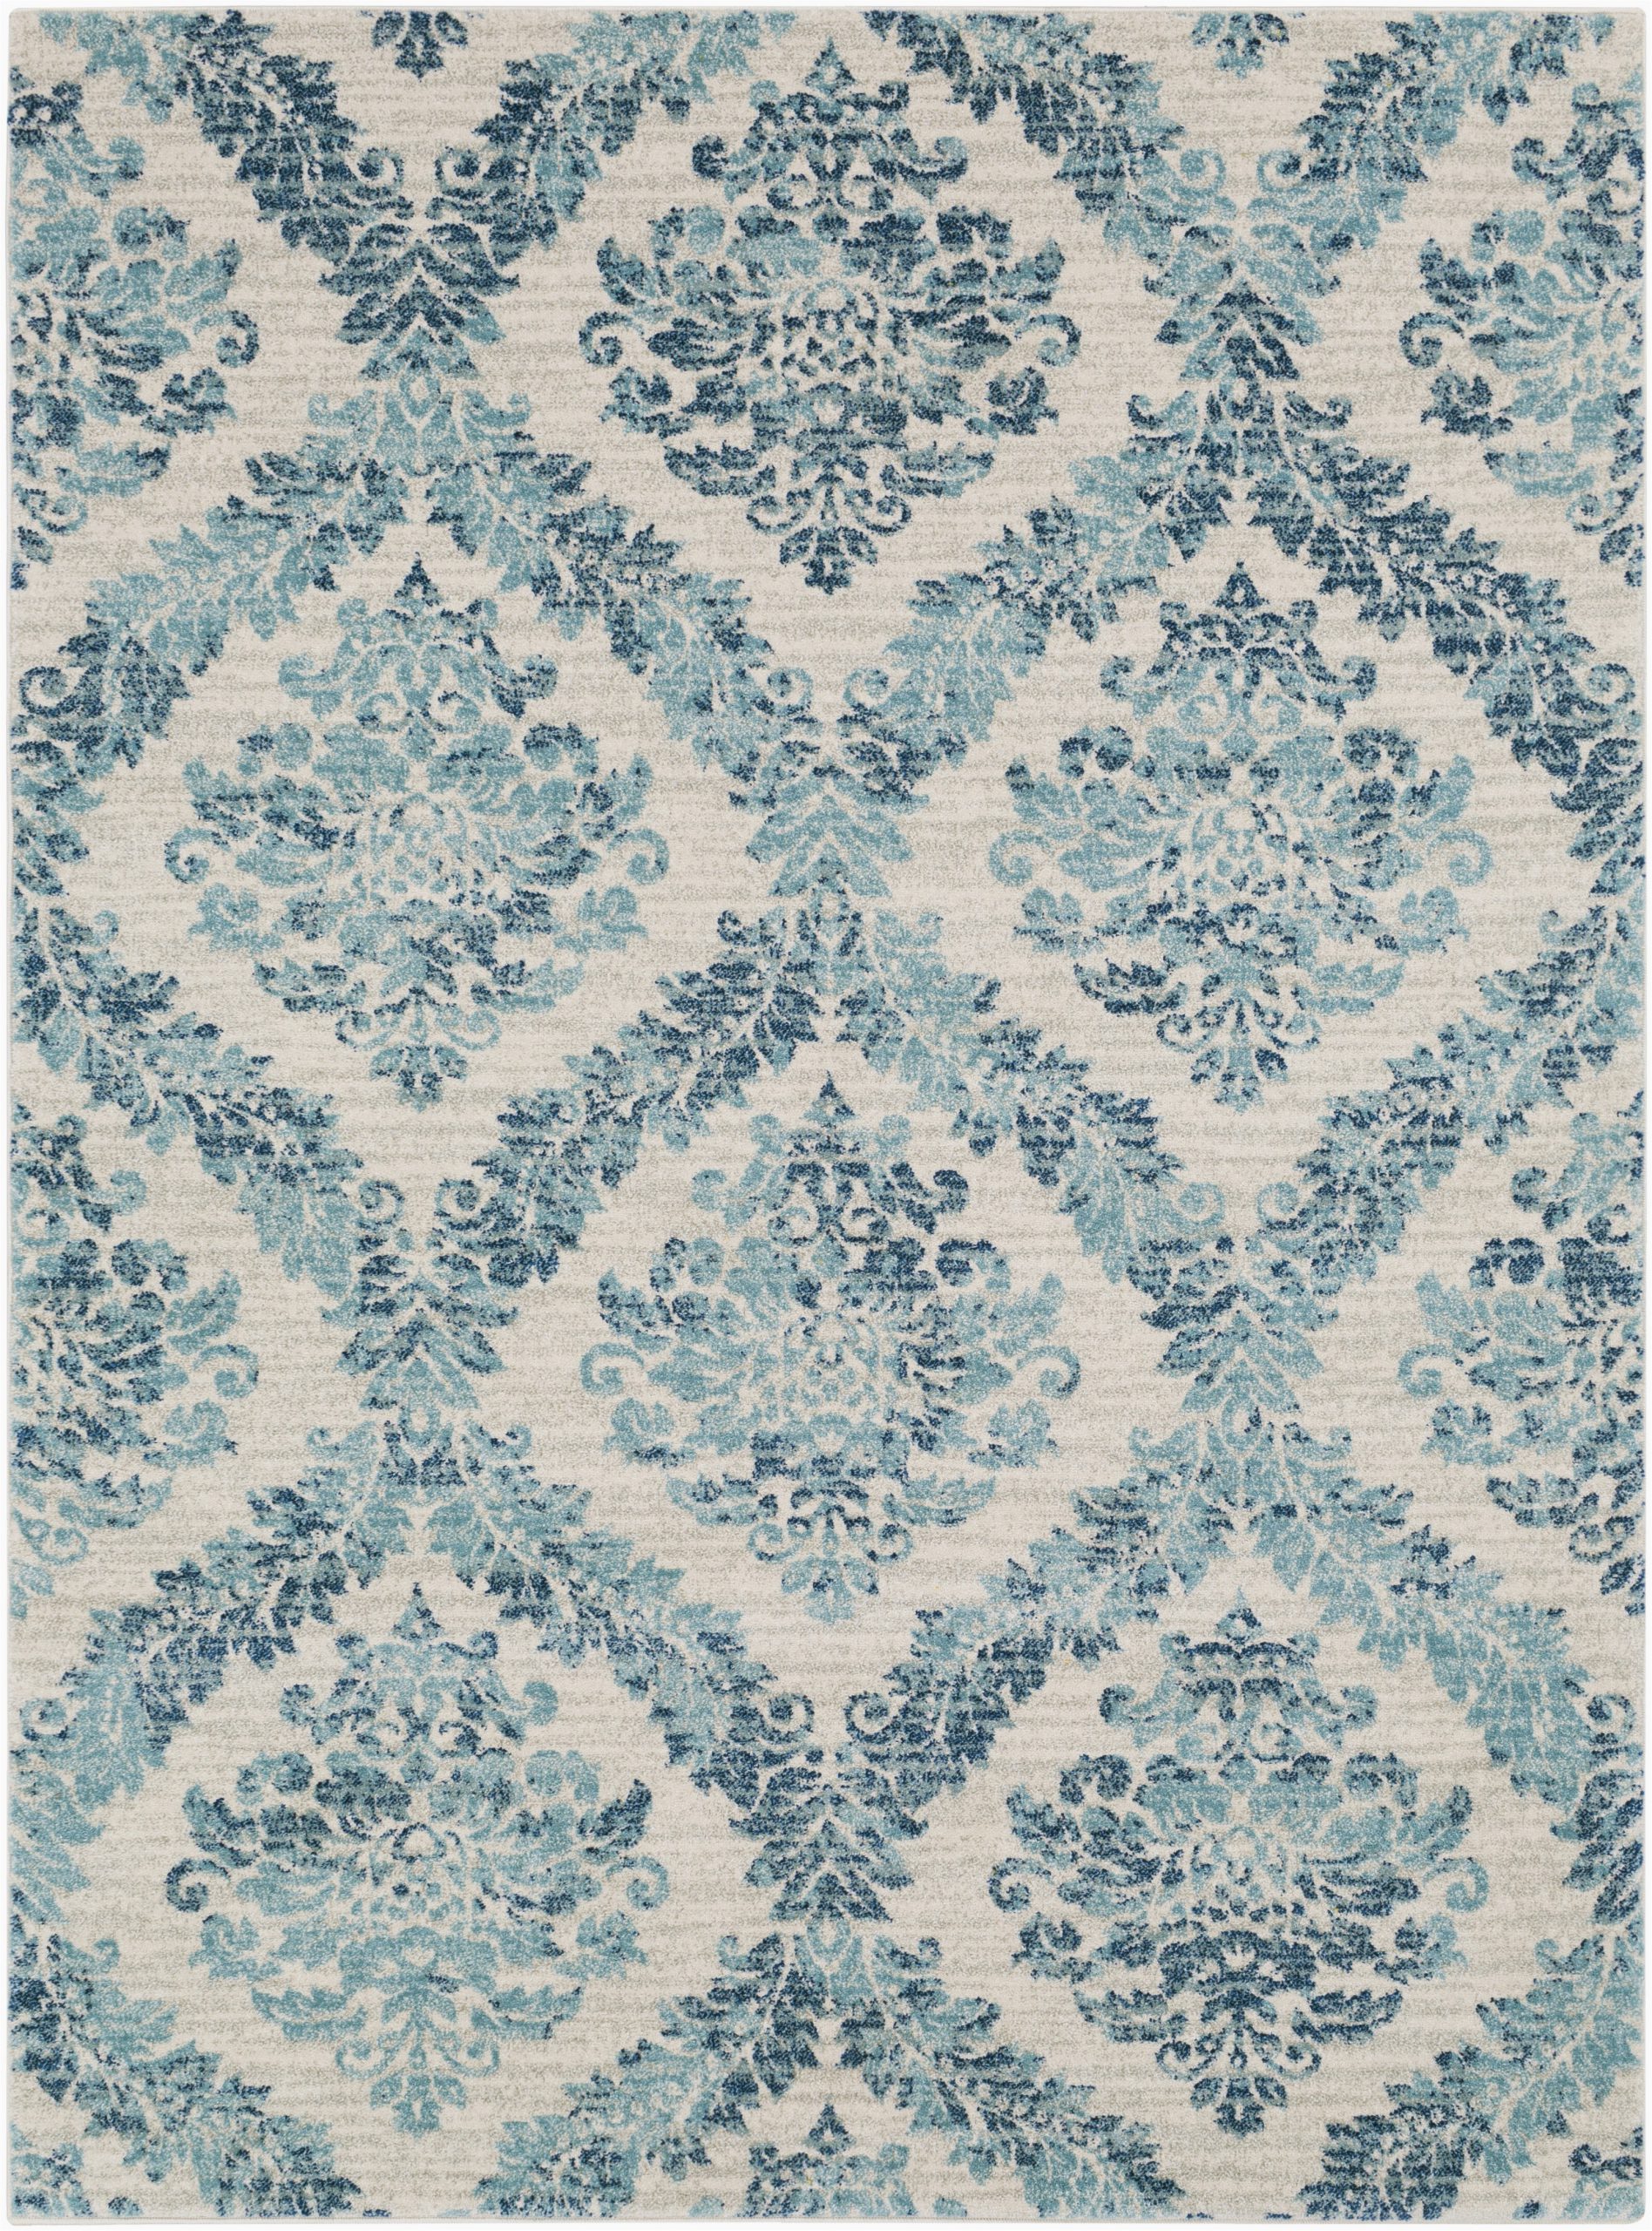 Navy Blue and Teal area Rugs Delana Dark Blue Teal Light Gray area Rug